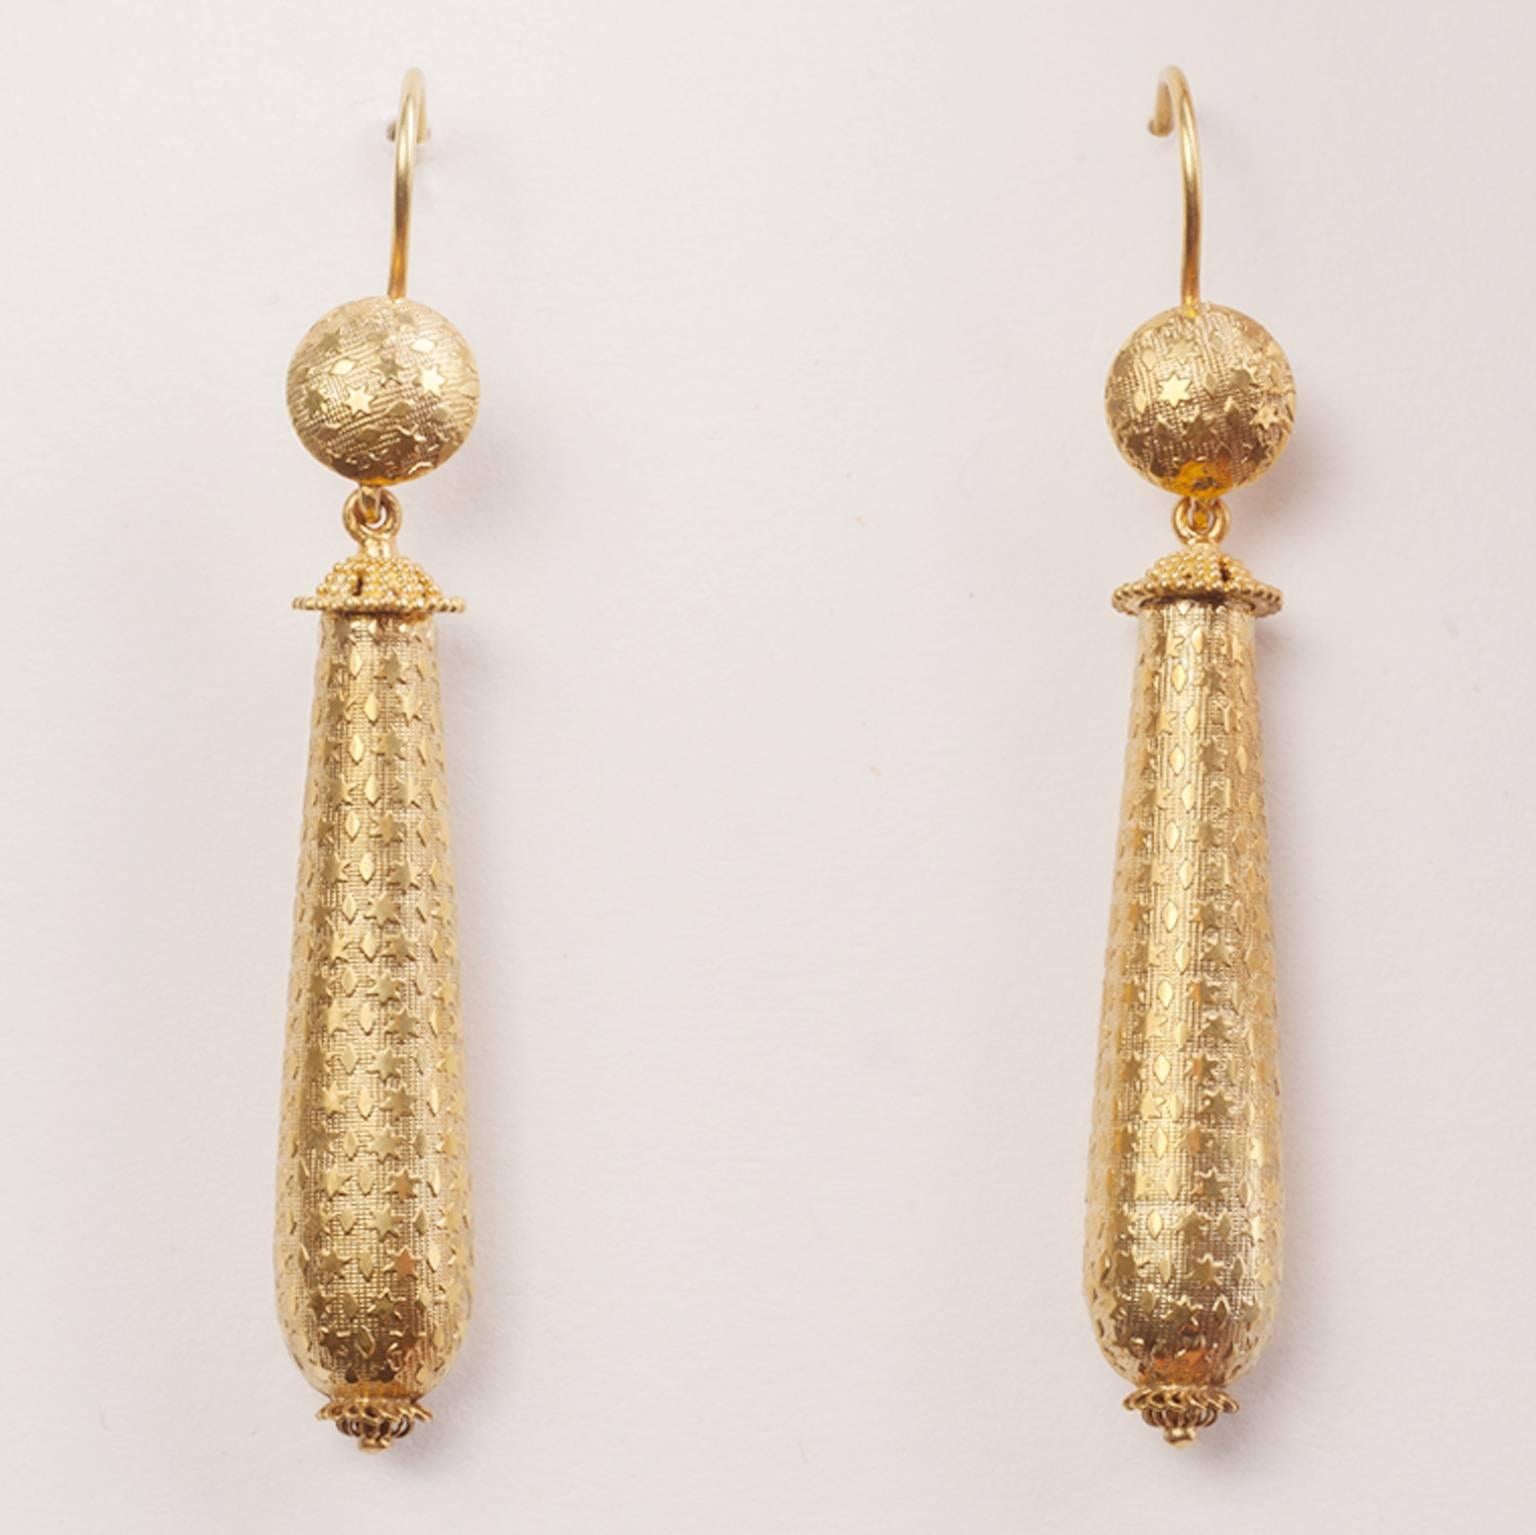 A pair of 15 carat gold drop earrings decorated with small stars and kites, England, 19th century.

weight: 6 grams
dimensions: 6.4 x 0.9 cm.